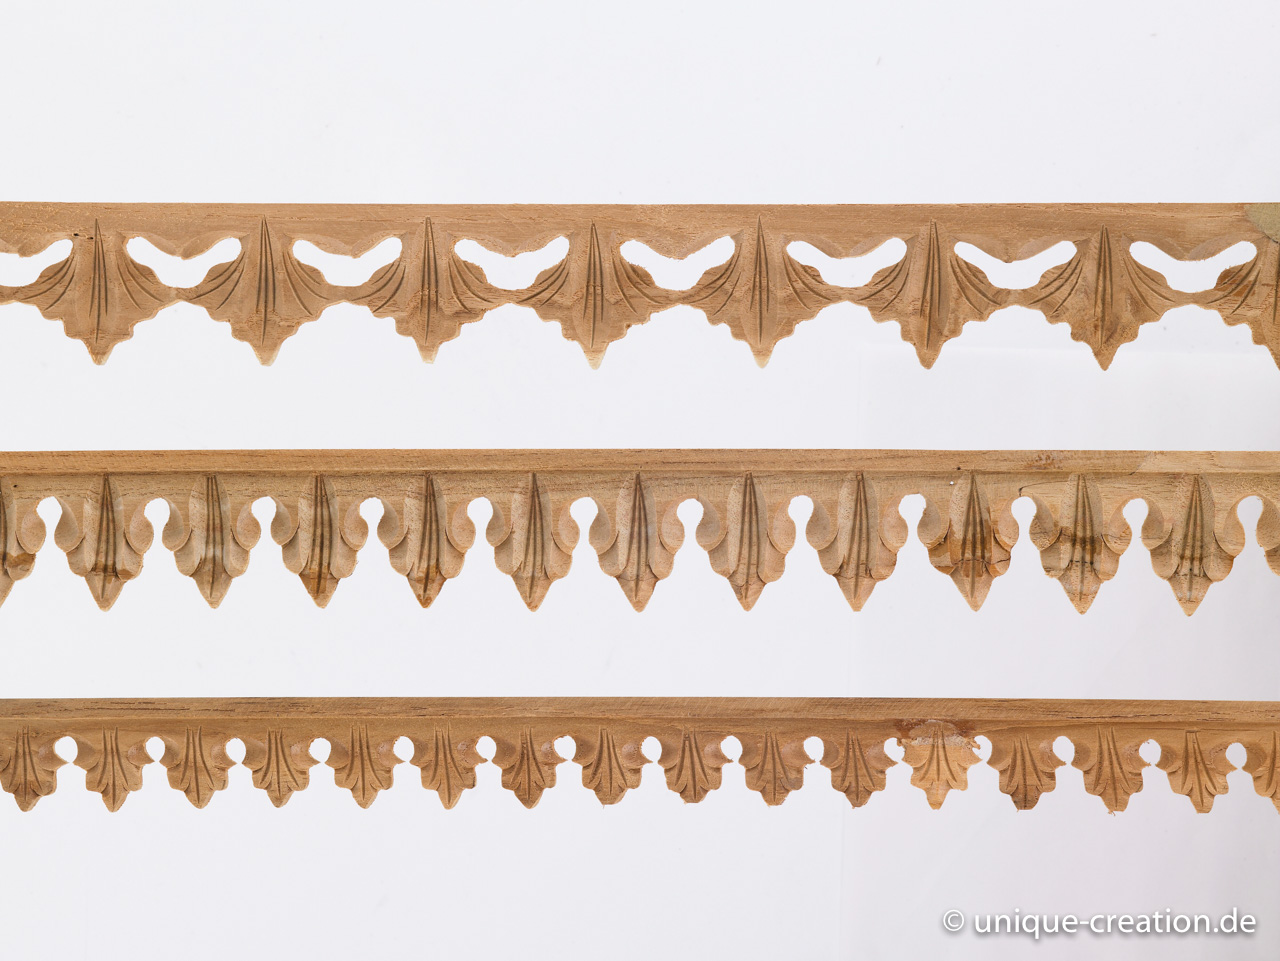 Handcarved wood strips made from teak and other hardwood